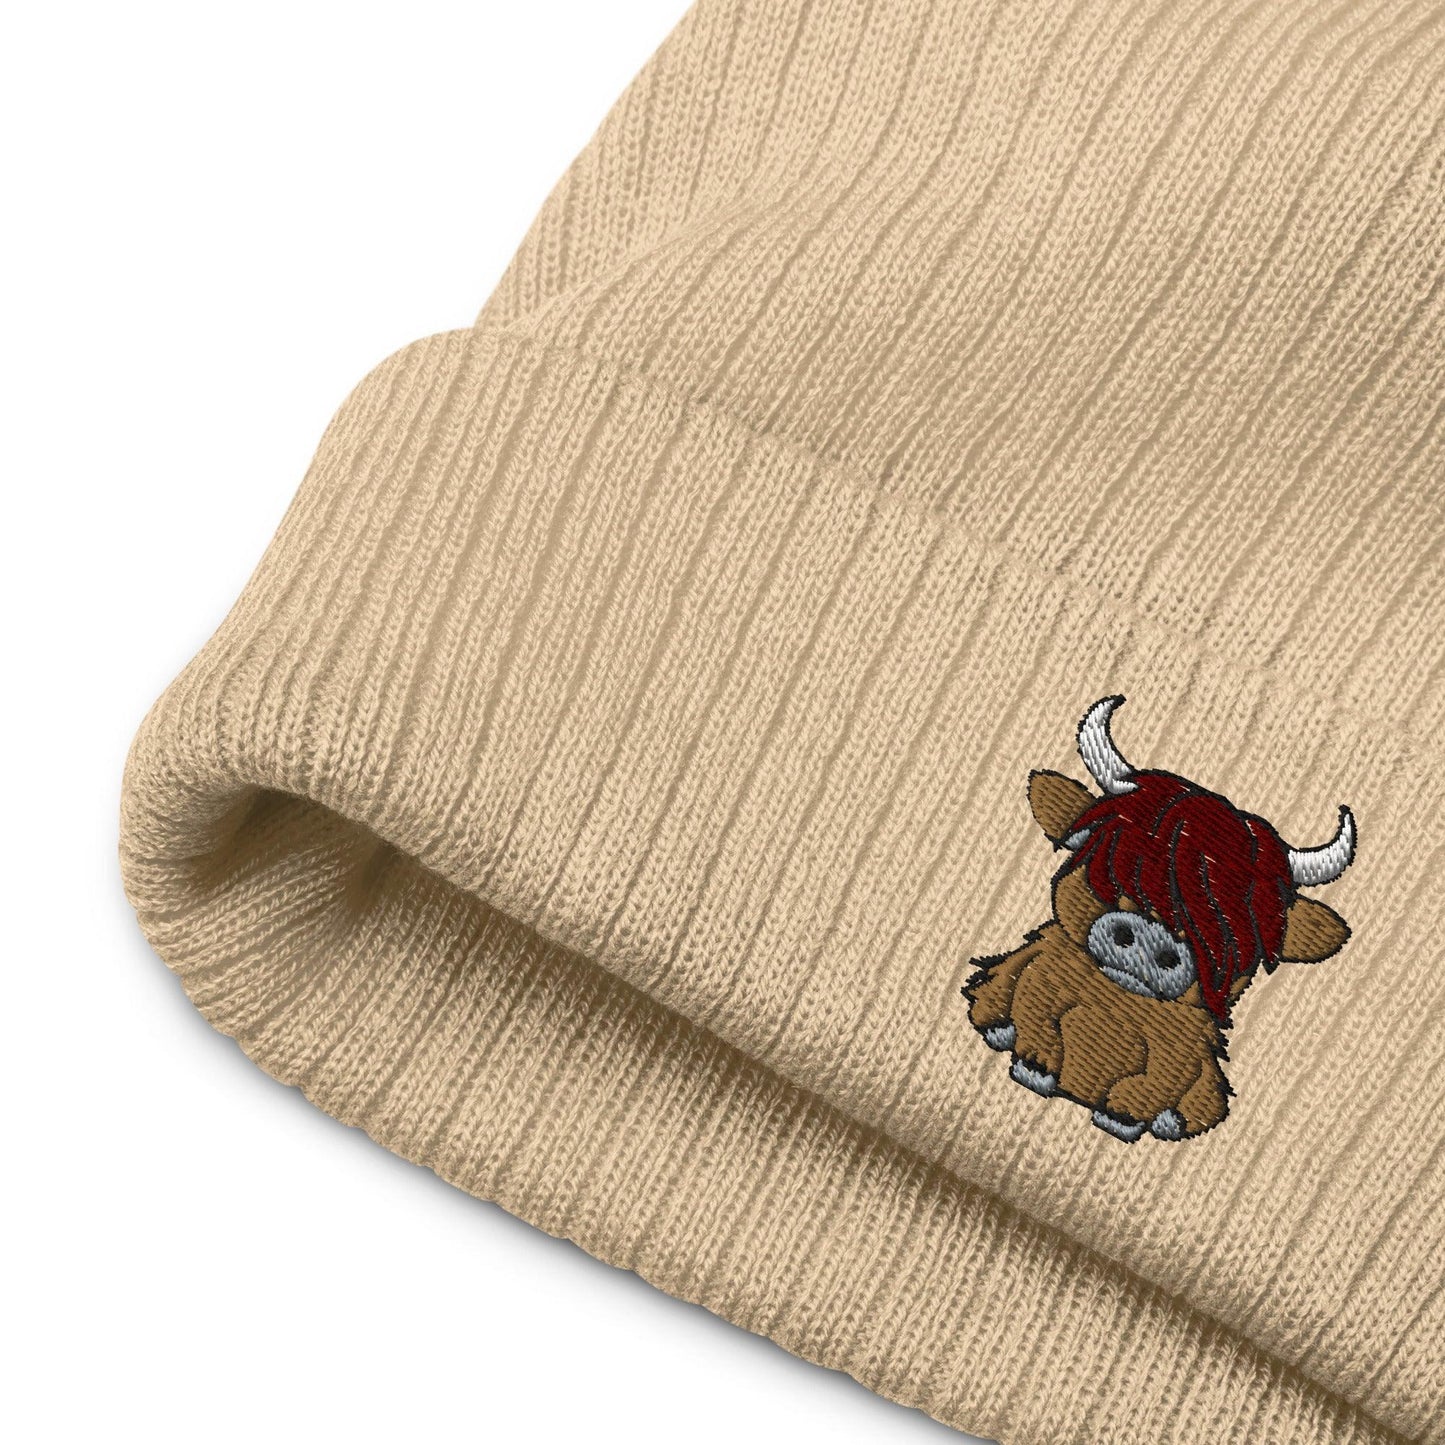 Scottish Highland Cow Embroidered Beanie - The Global Wanderer